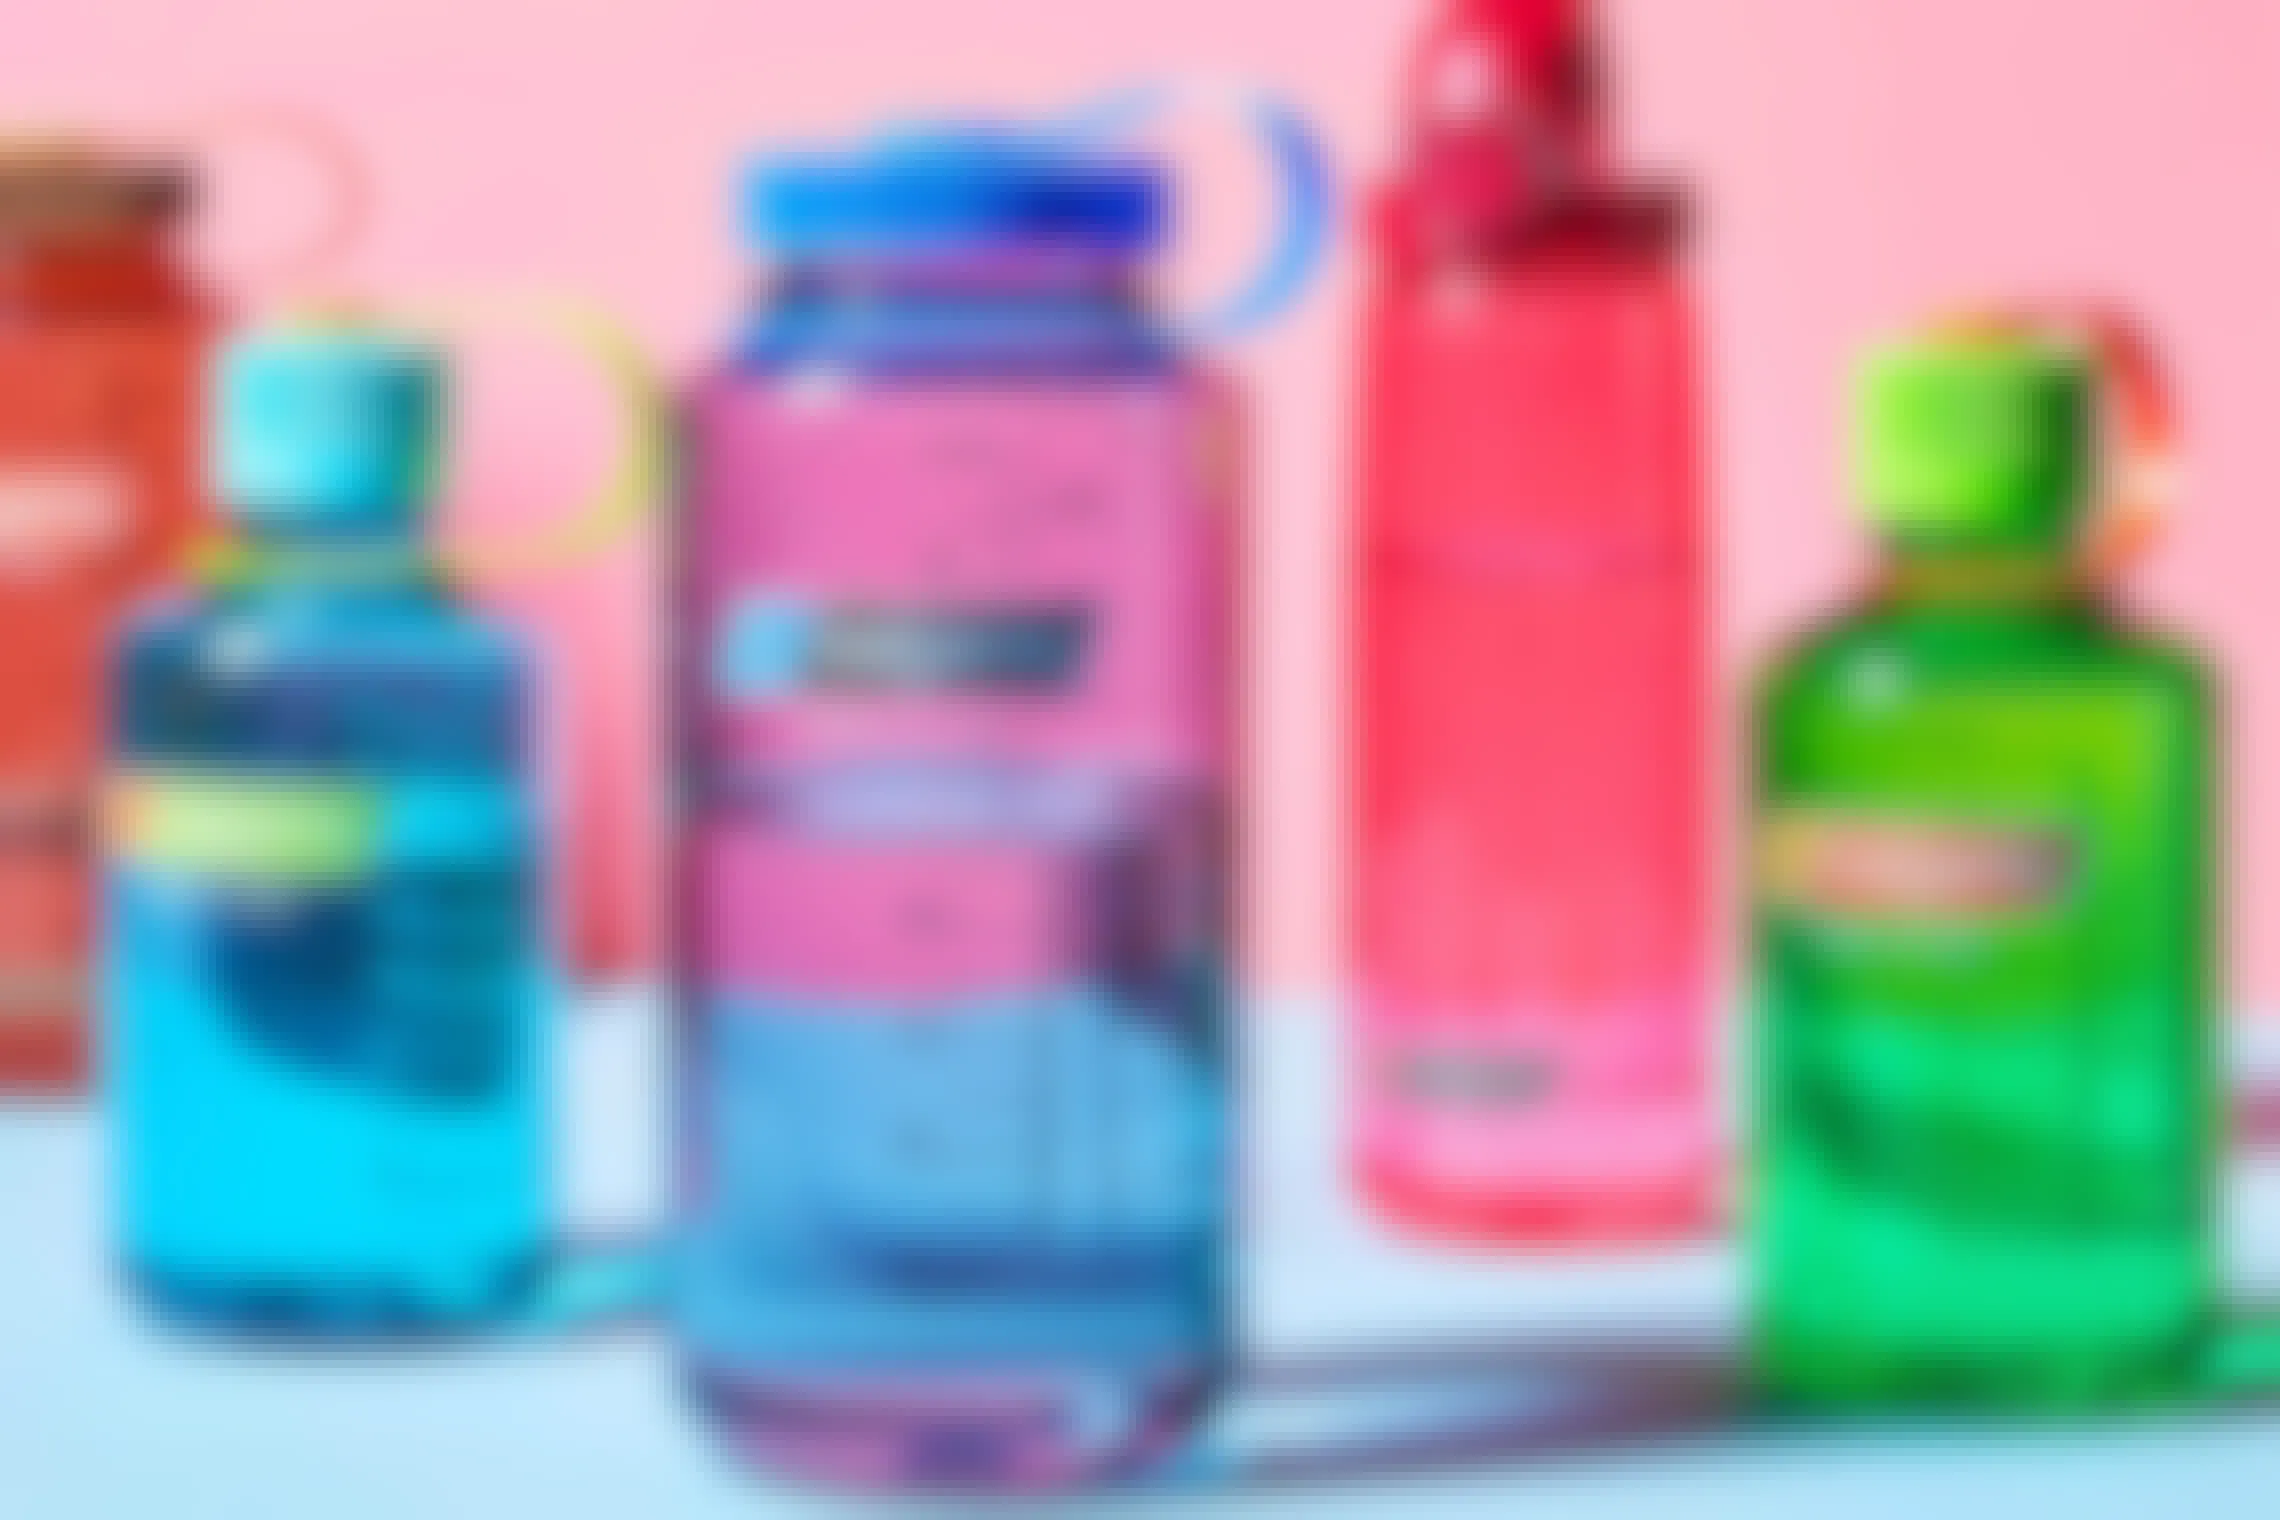 5 Nalgene water bottles in front of a pink background